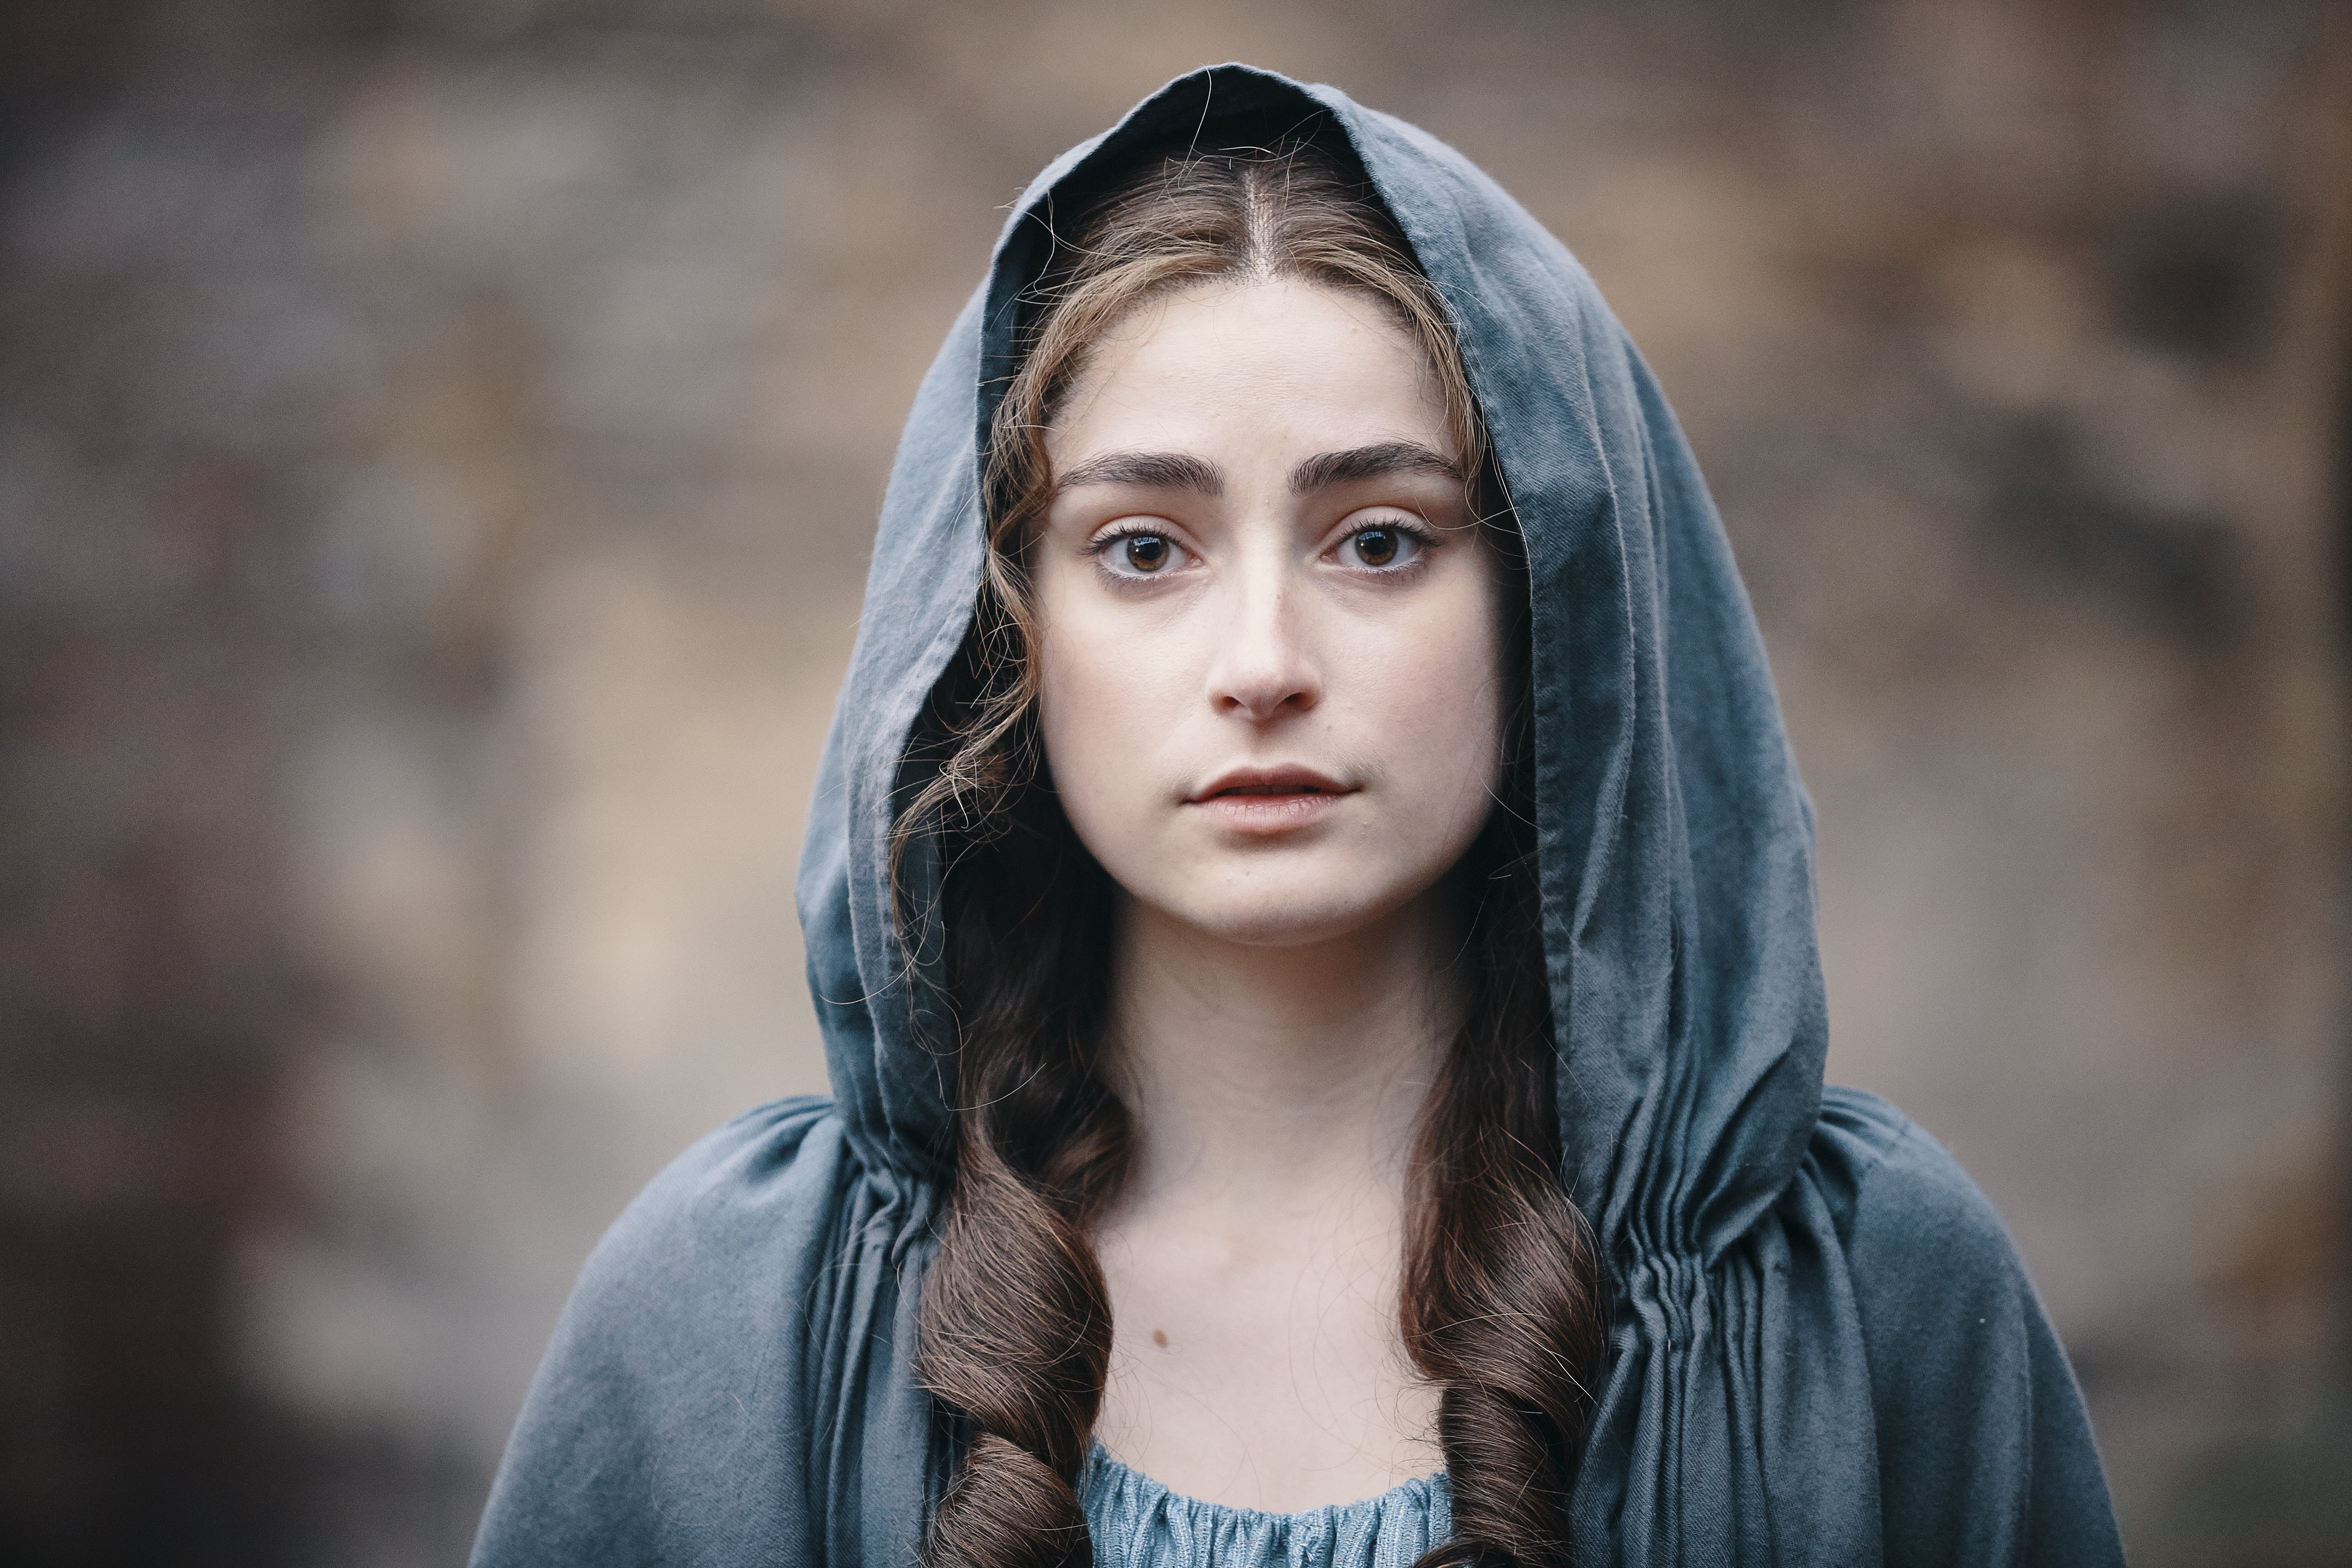 Interview: Ellise Chappell on returning to 'Poldark' - Articles | CROOKES Magazine5648 x 3765